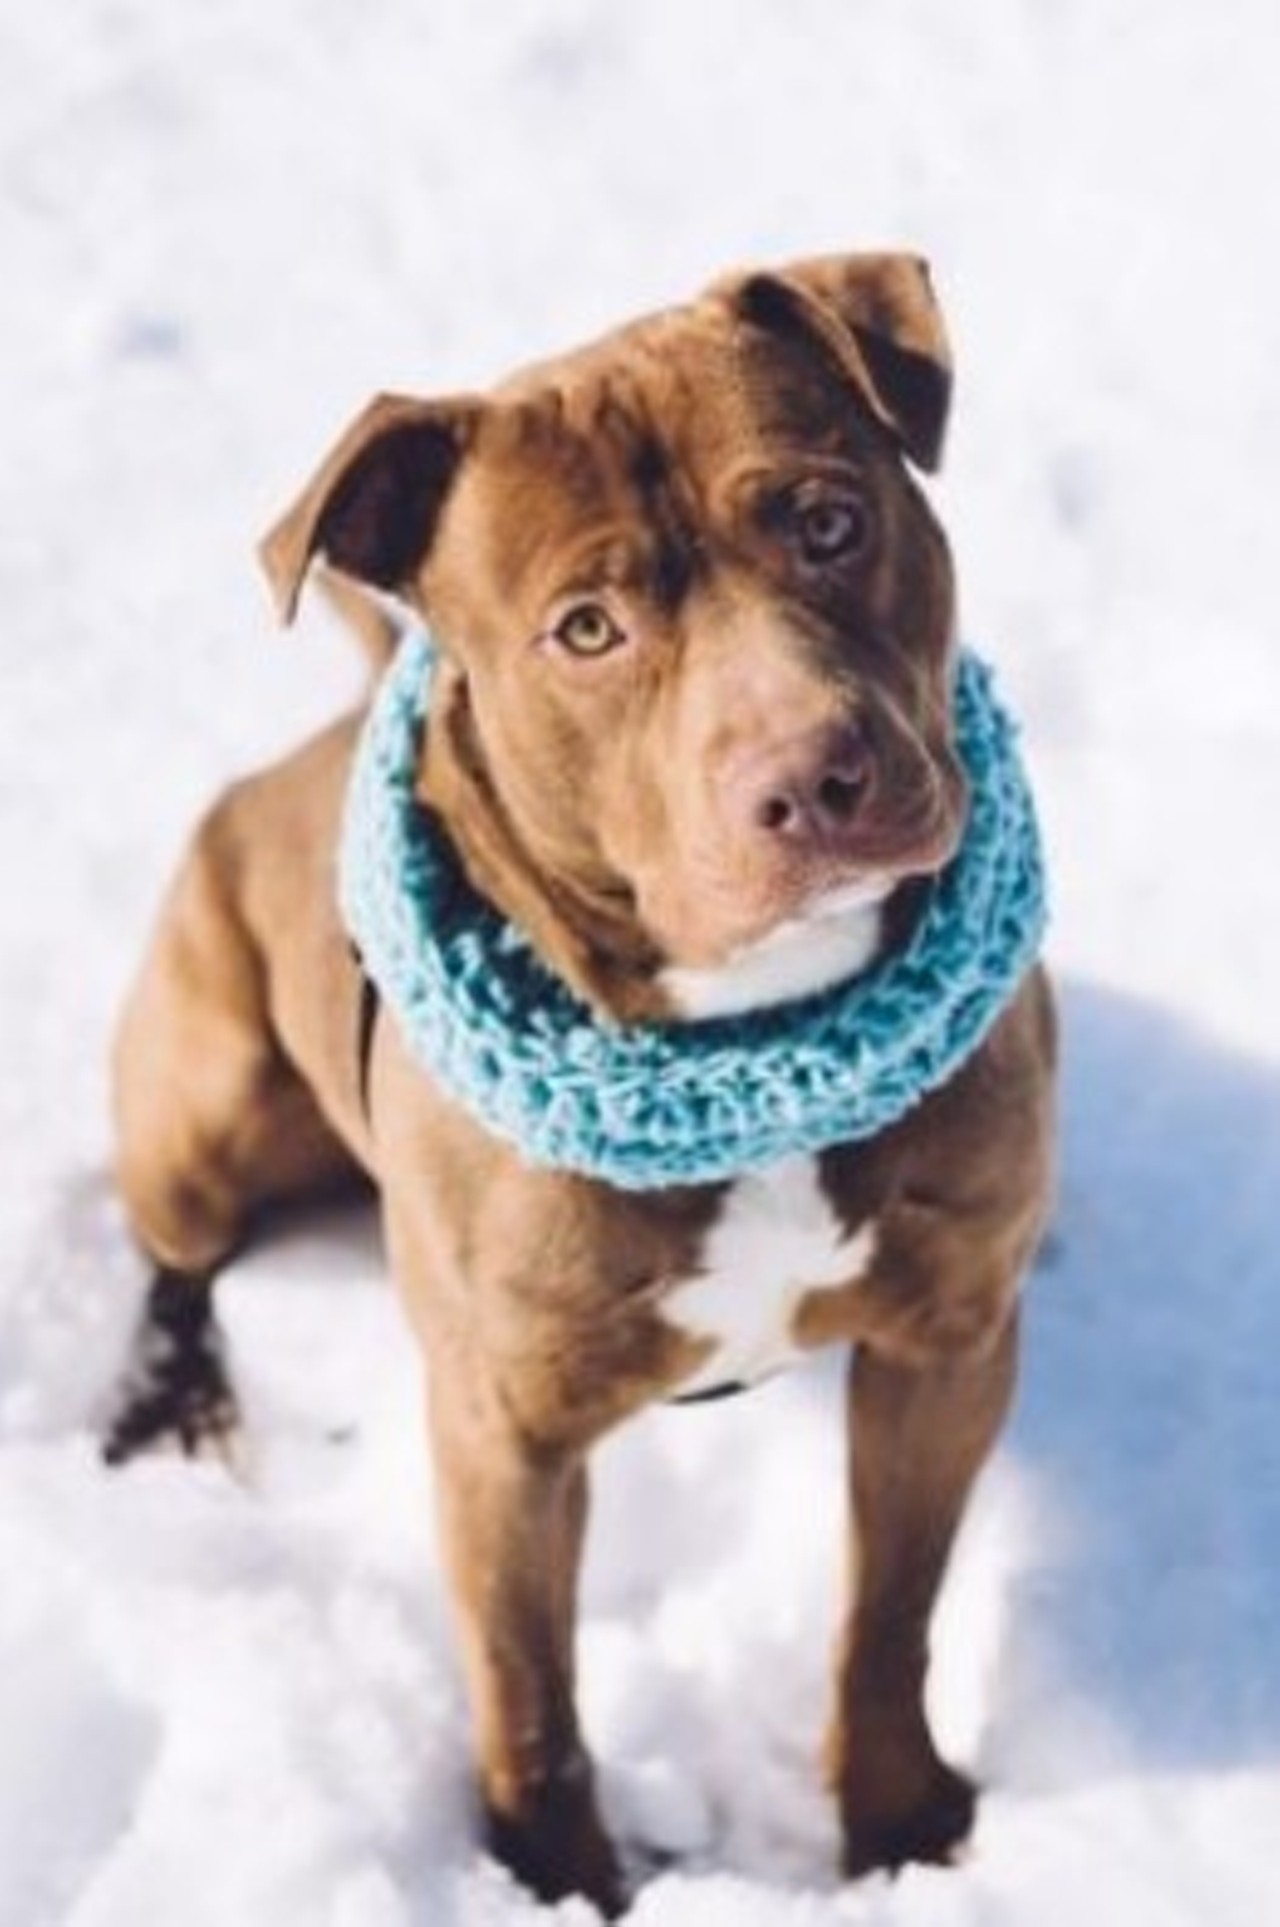  Delmont
1-year-old, Terrier/American Pit Bull mix